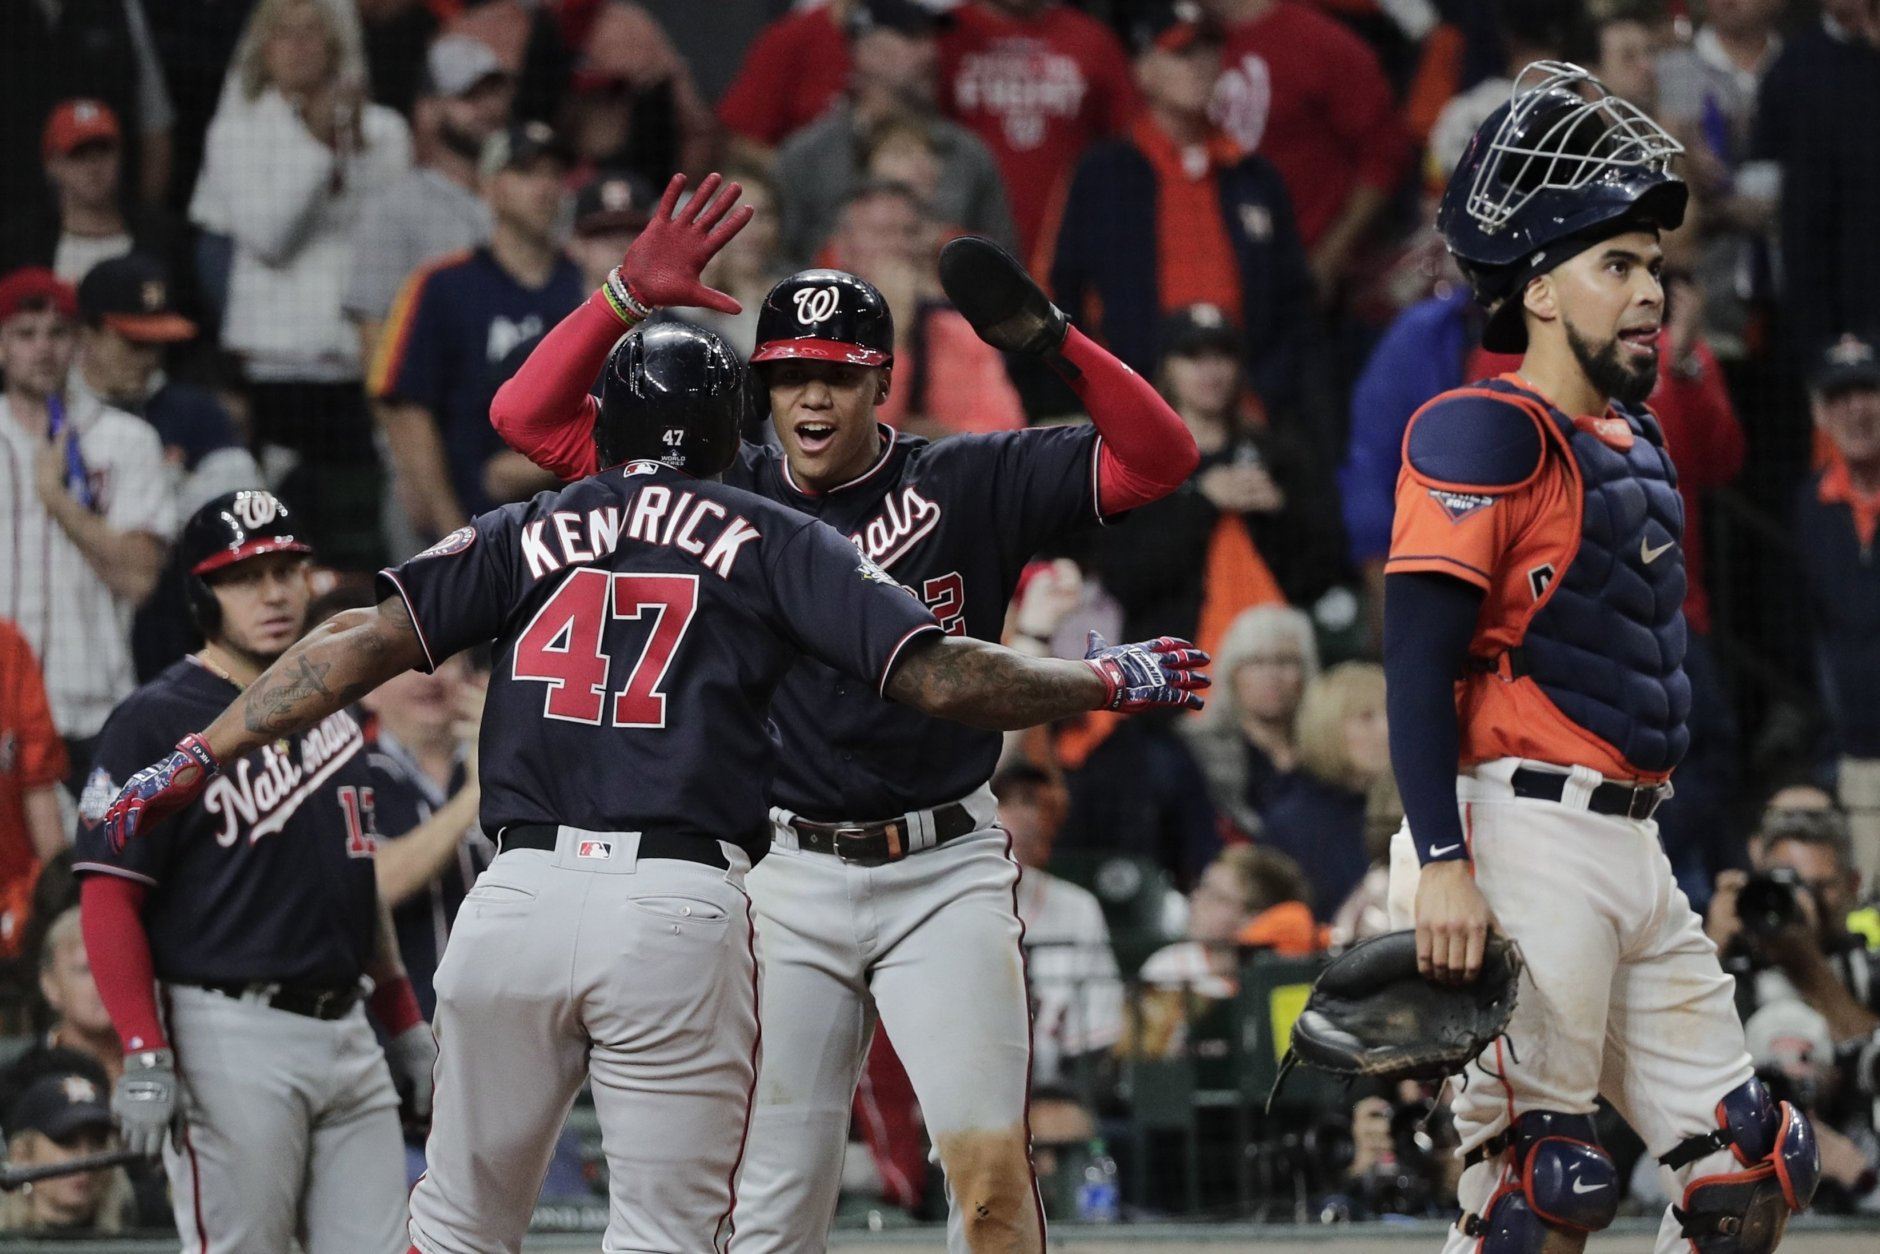 Washington Nationals' Howie Kendrick is congratulated by Juan Soto after hitting a two-run home run during the seventh inning of Game 7 of the baseball World Series against the Houston Astros Wednesday, Oct. 30, 2019, in Houston. (AP Photo/David J. Phillip)